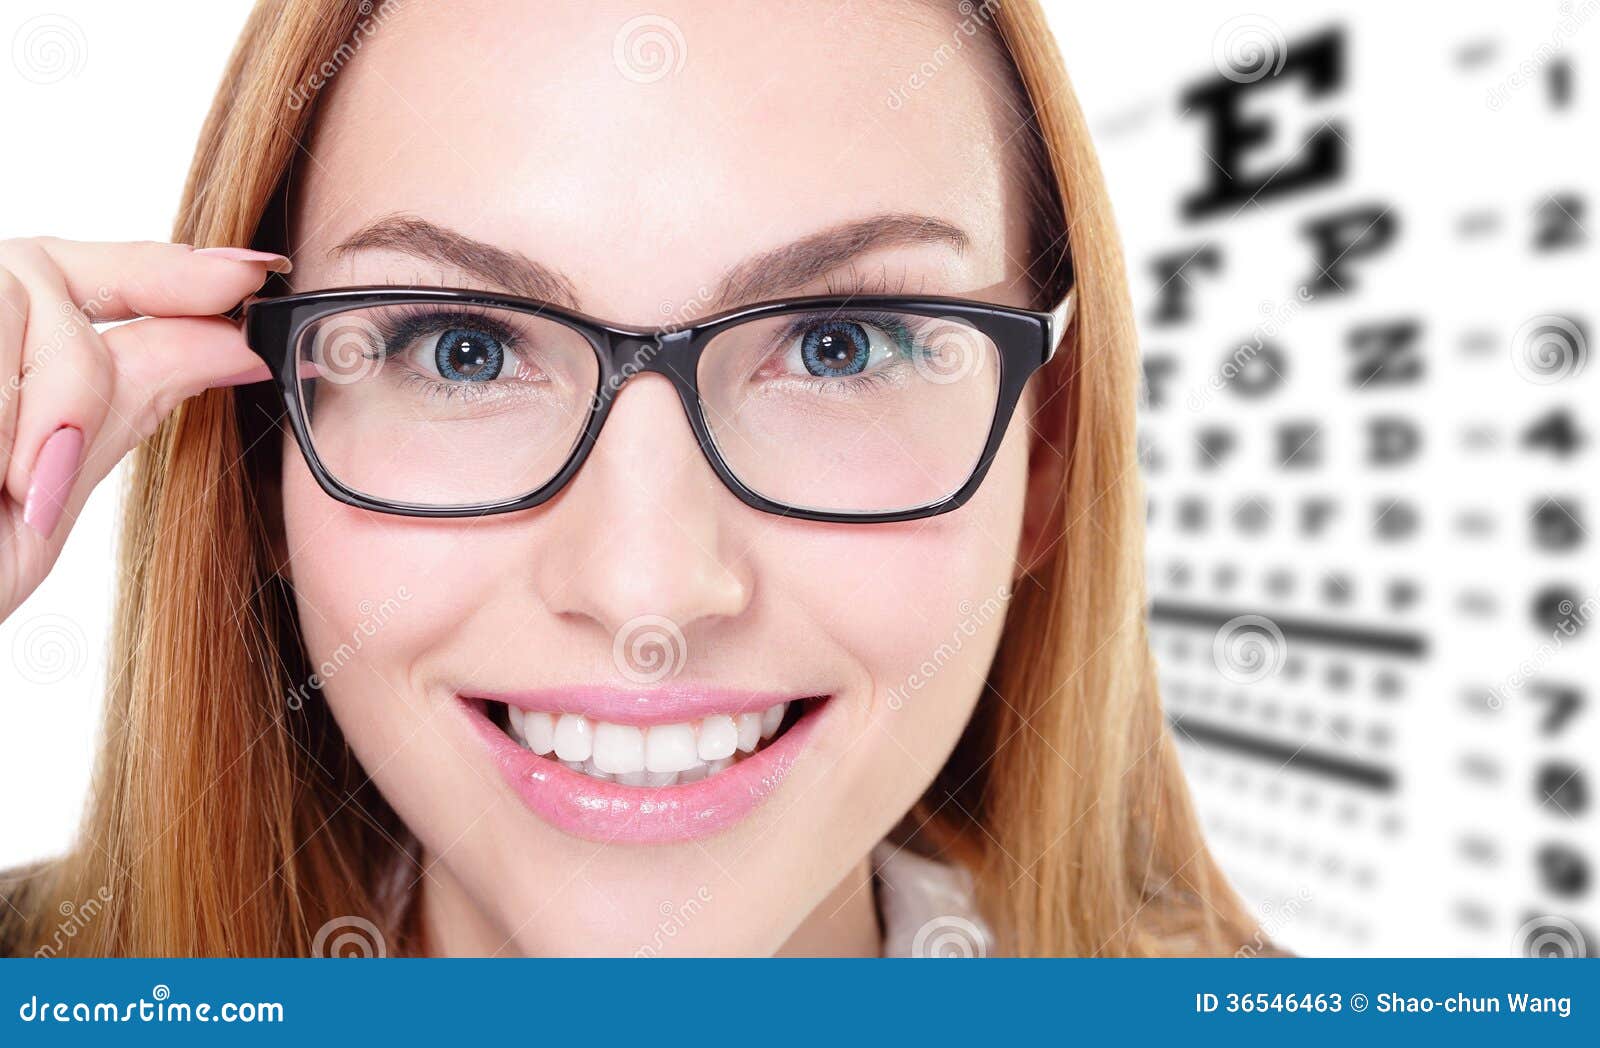 Woman with Glasses and Eye Test Chart Stock Image - Image of ...